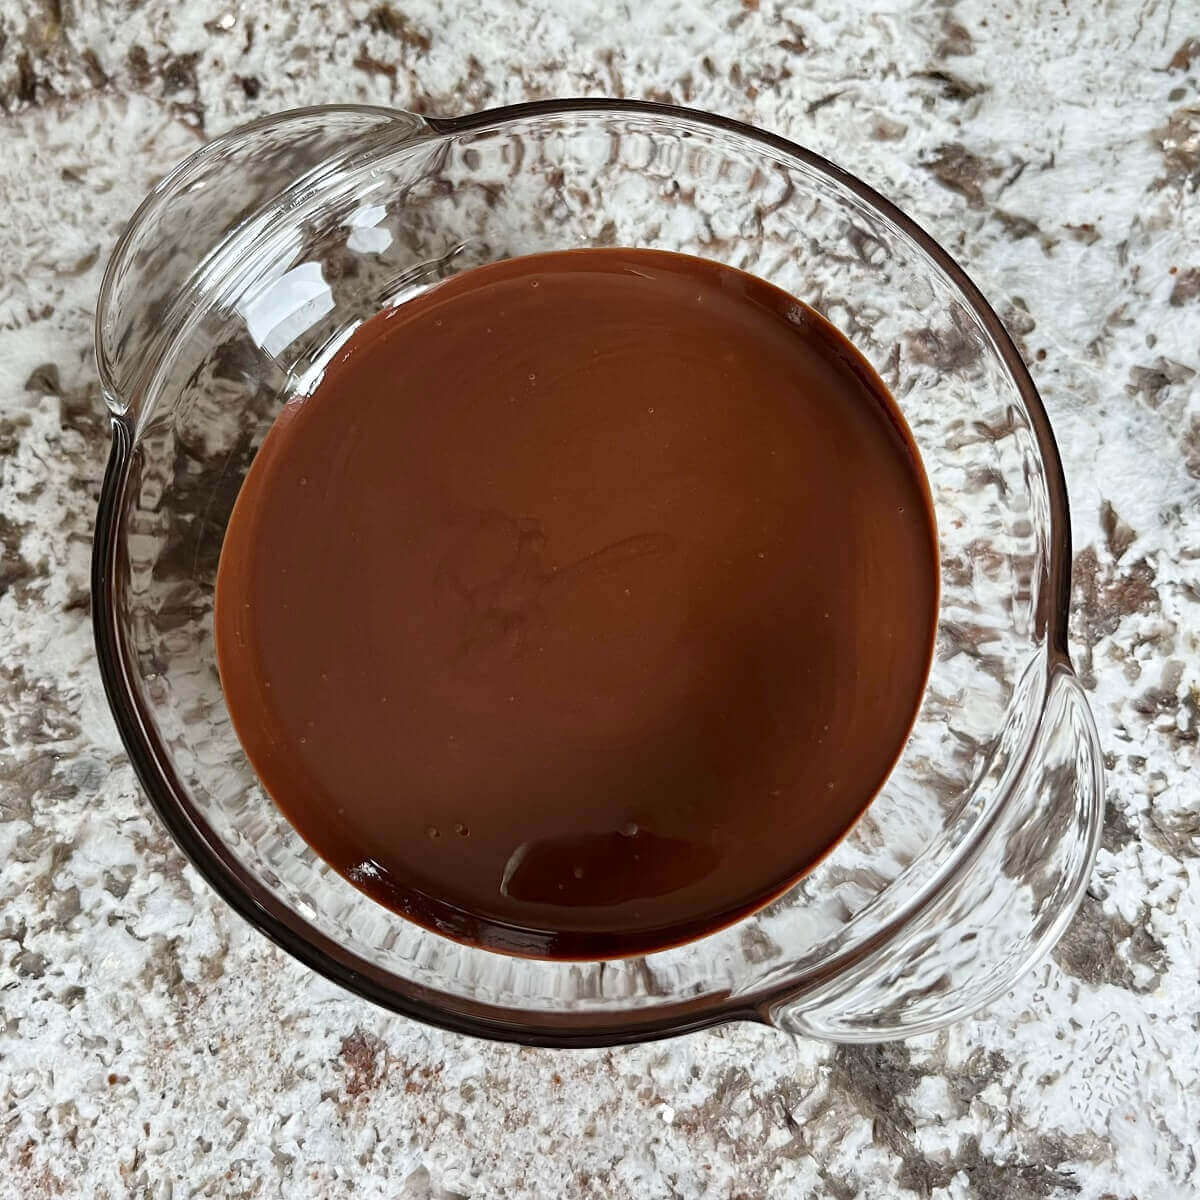 A mixture of tahini and melted chocolate in a glass bowl.